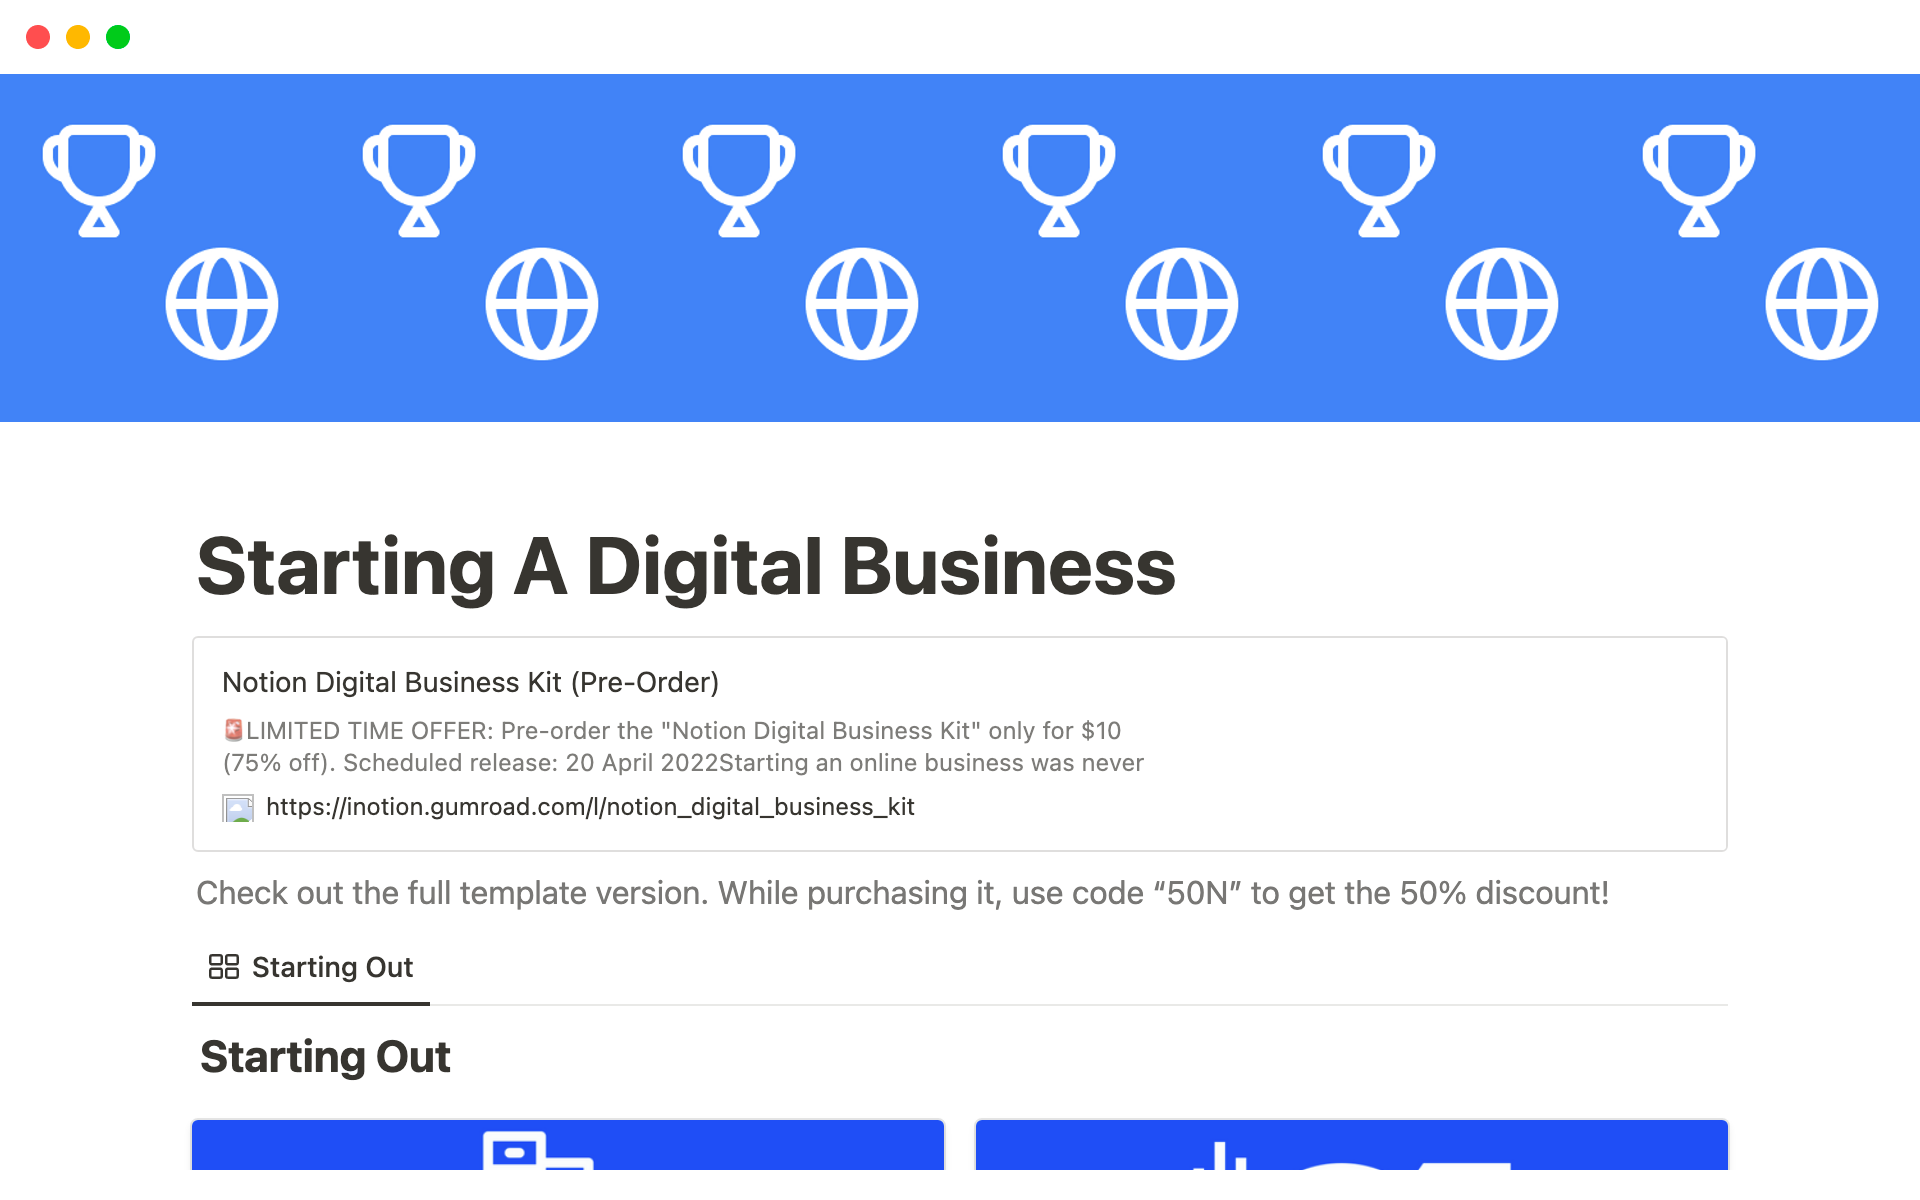 Get the awesome lessons about starting a digital business right within Notion.